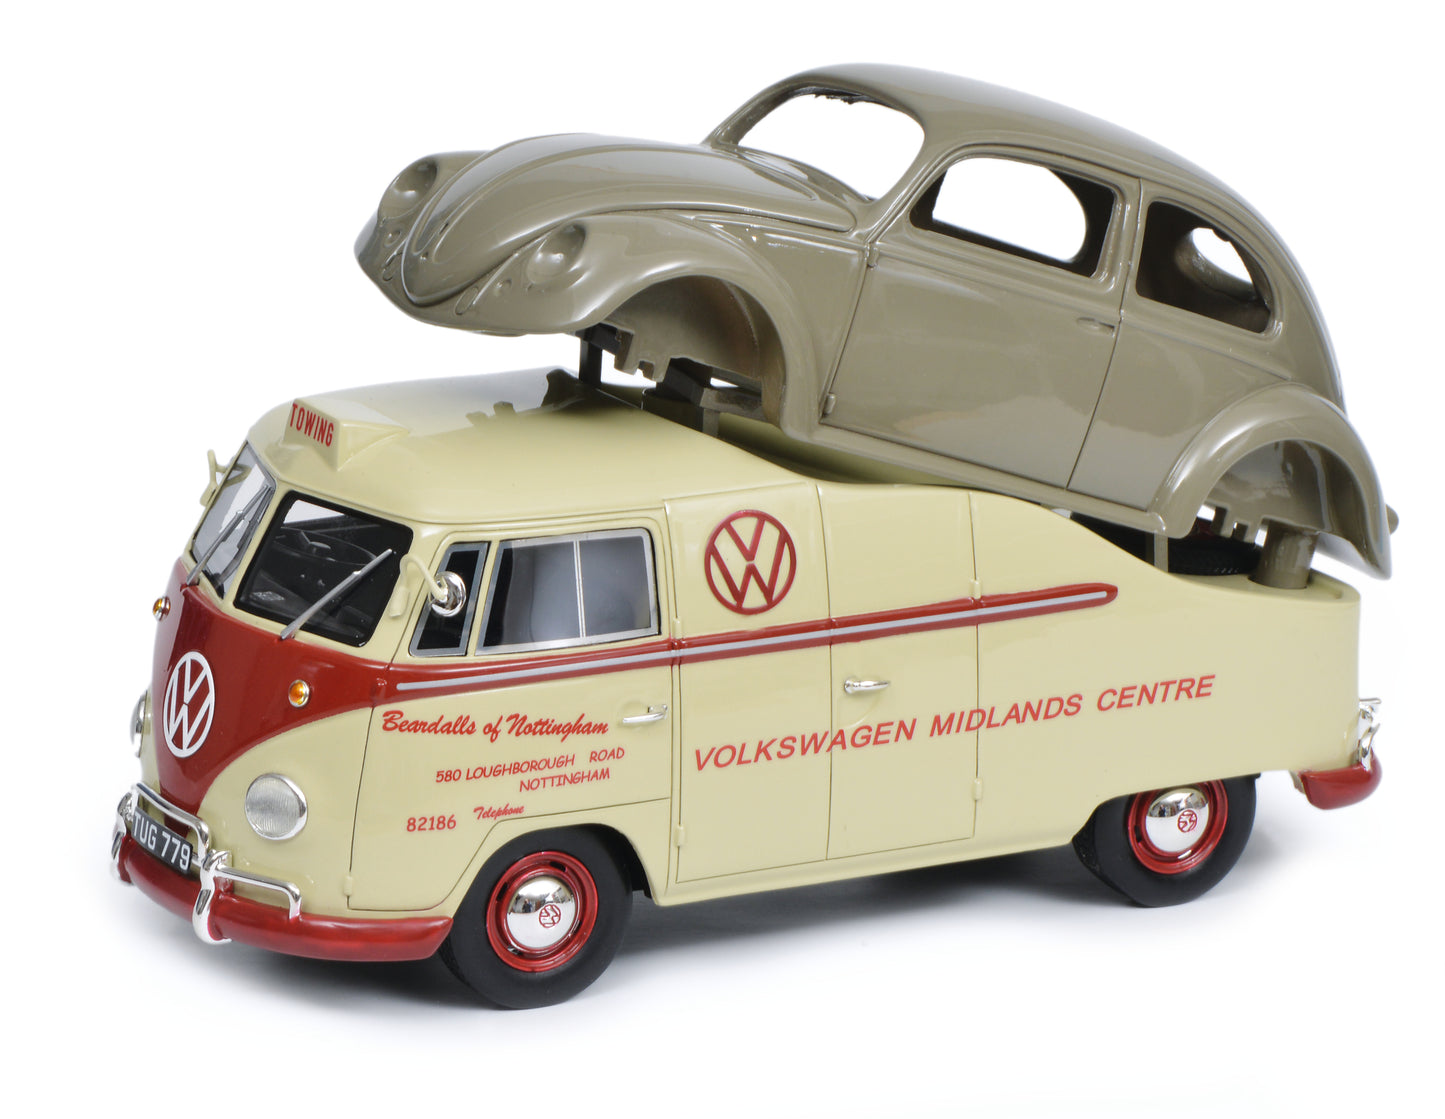 Schuco 1:18 Volkswagen T1a Midlands Centre with beetle chassis Limited 500 450016300